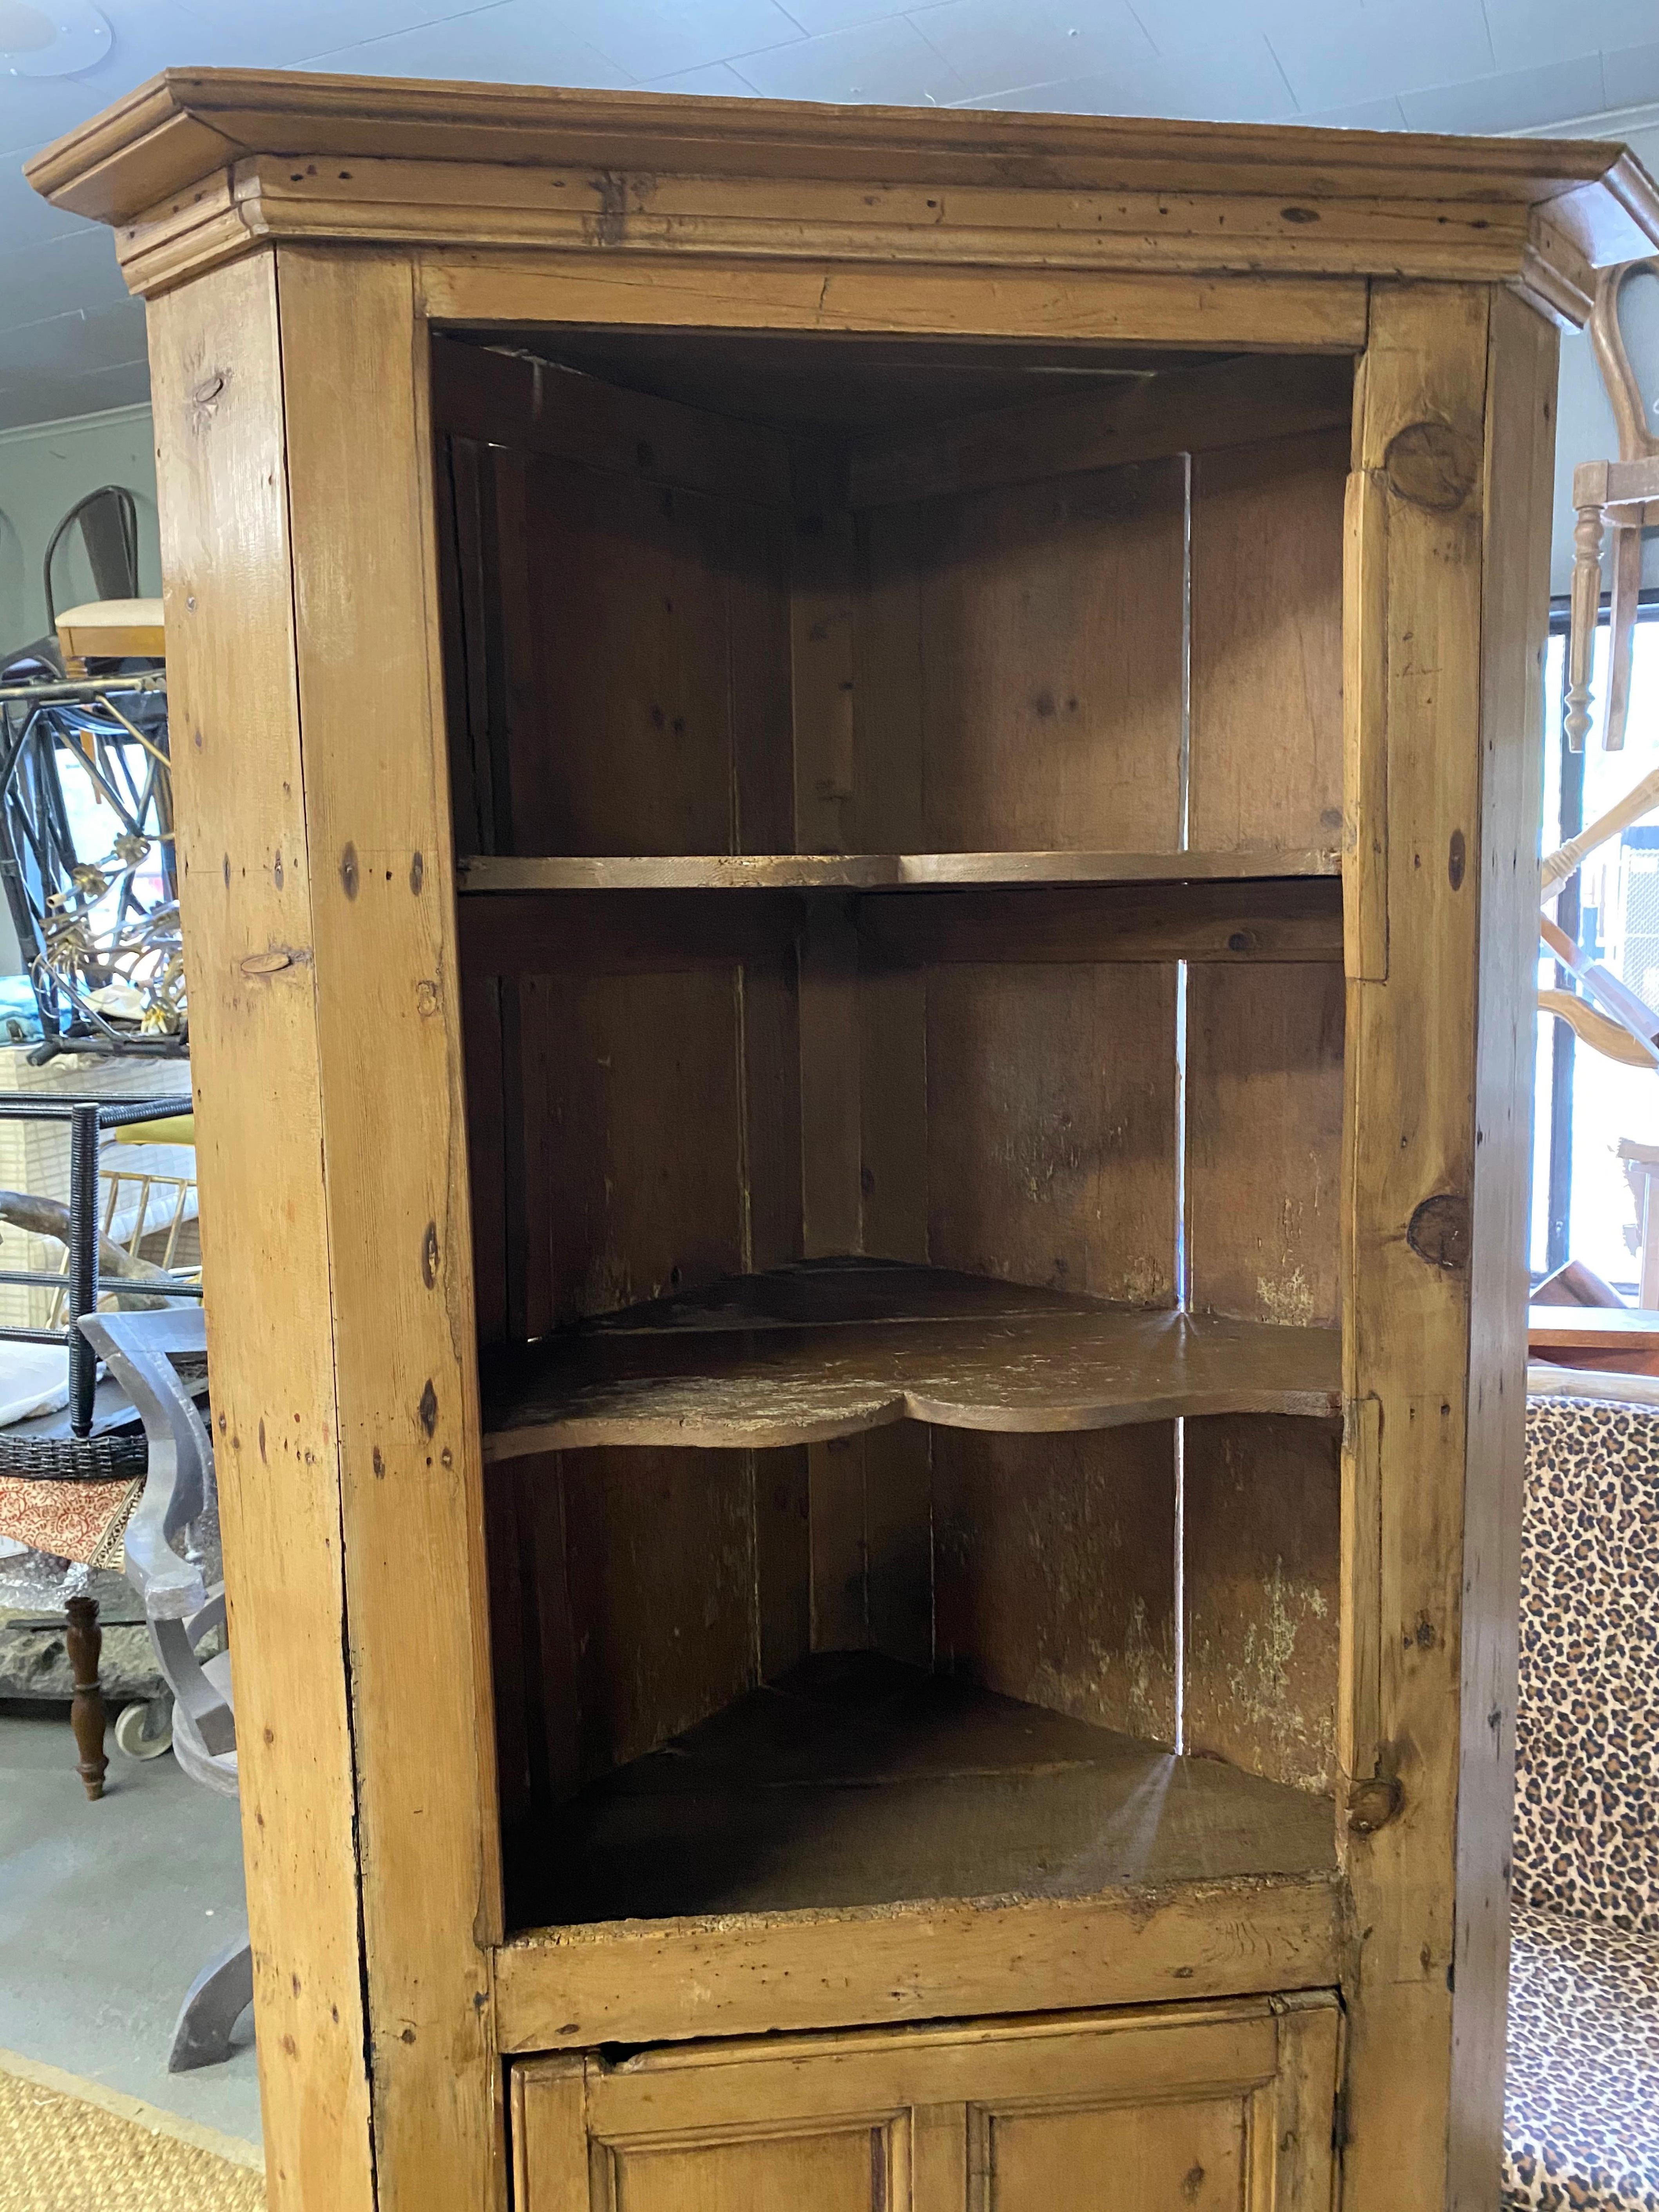 Full of character, this Swedish style open top corner cupboard is revealed in the aged patina of the pine. It has been given a wax finish, bringing out the warmth of the wood. Corner cupboards were a typical household item in turn of the century